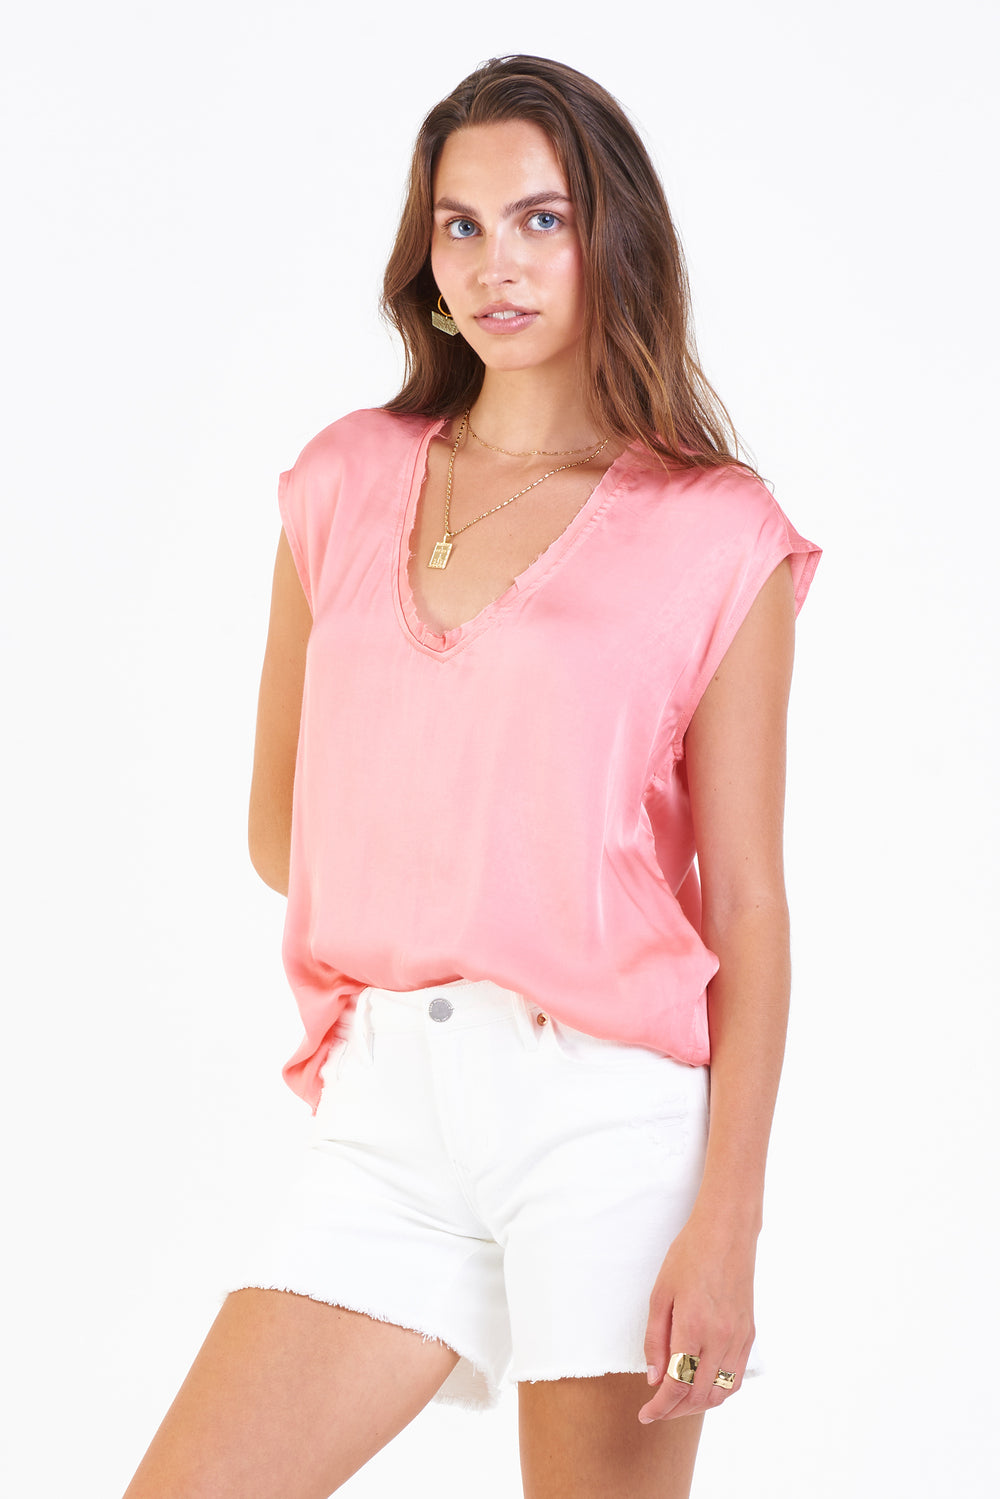 YANIS V-NECK SLEEVELESS TOP-SHELL PINK - Kingfisher Road - Online Boutique